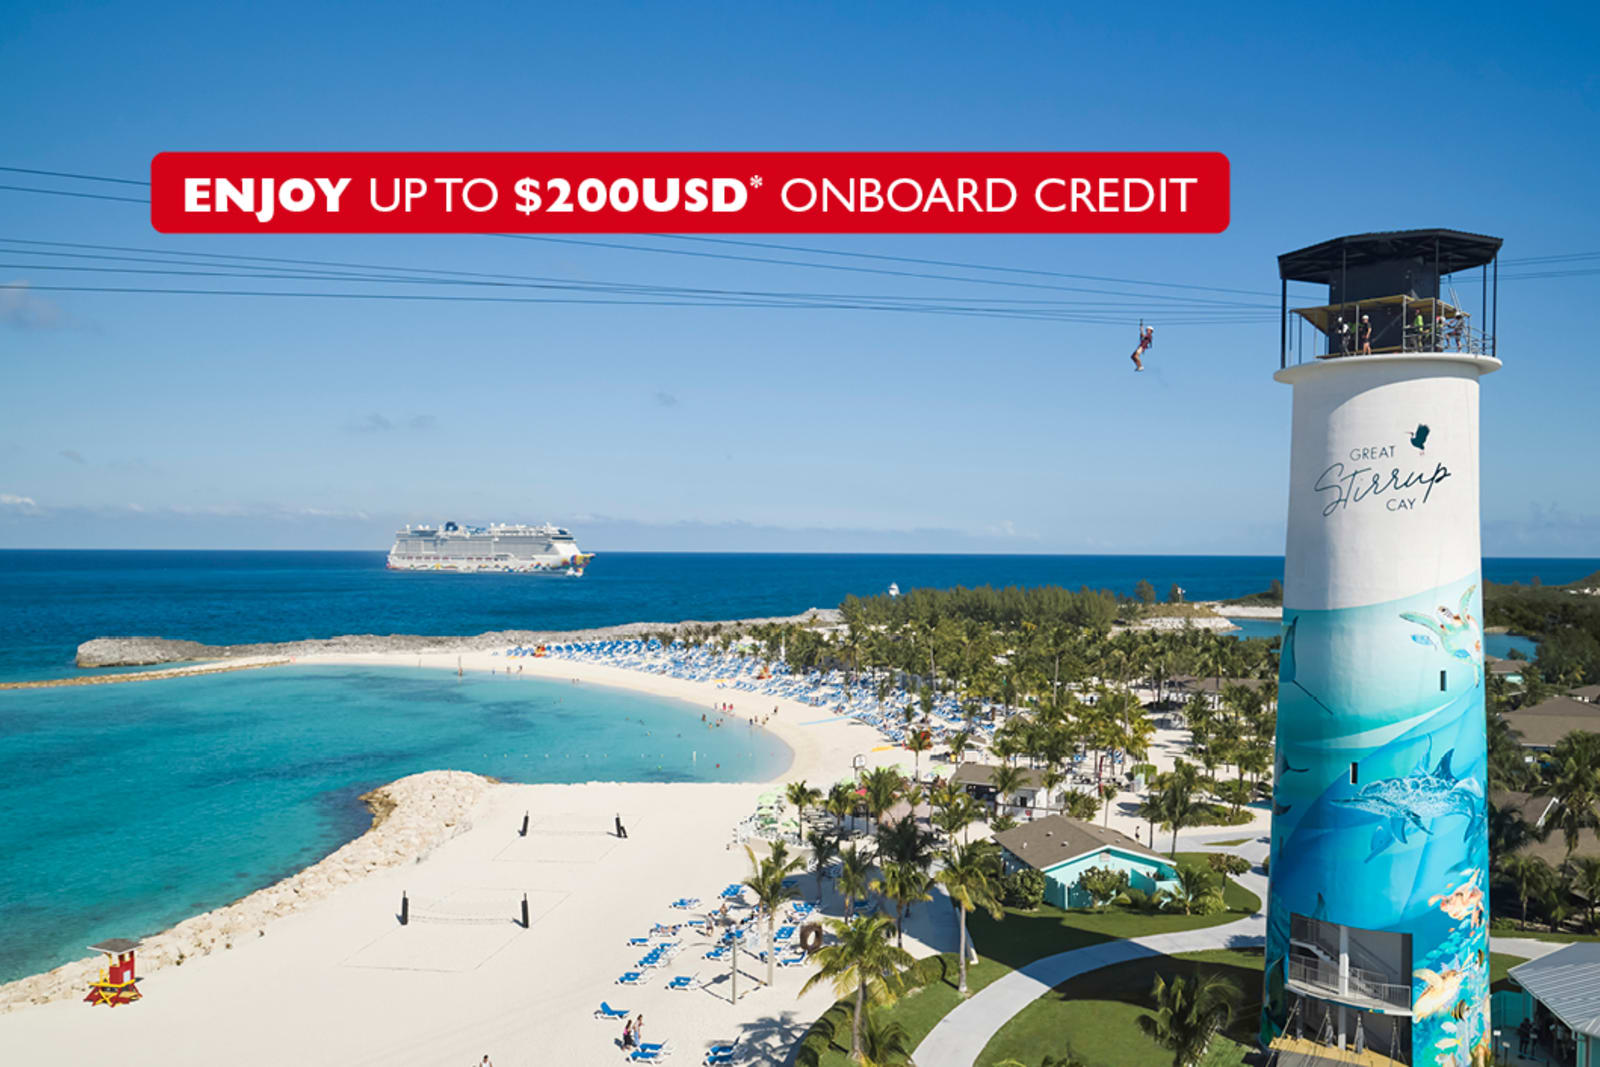 Norwegian Cruise Line's 7-night Caribbean itinerary will take you to the private island destination, Great Stirrup Cay